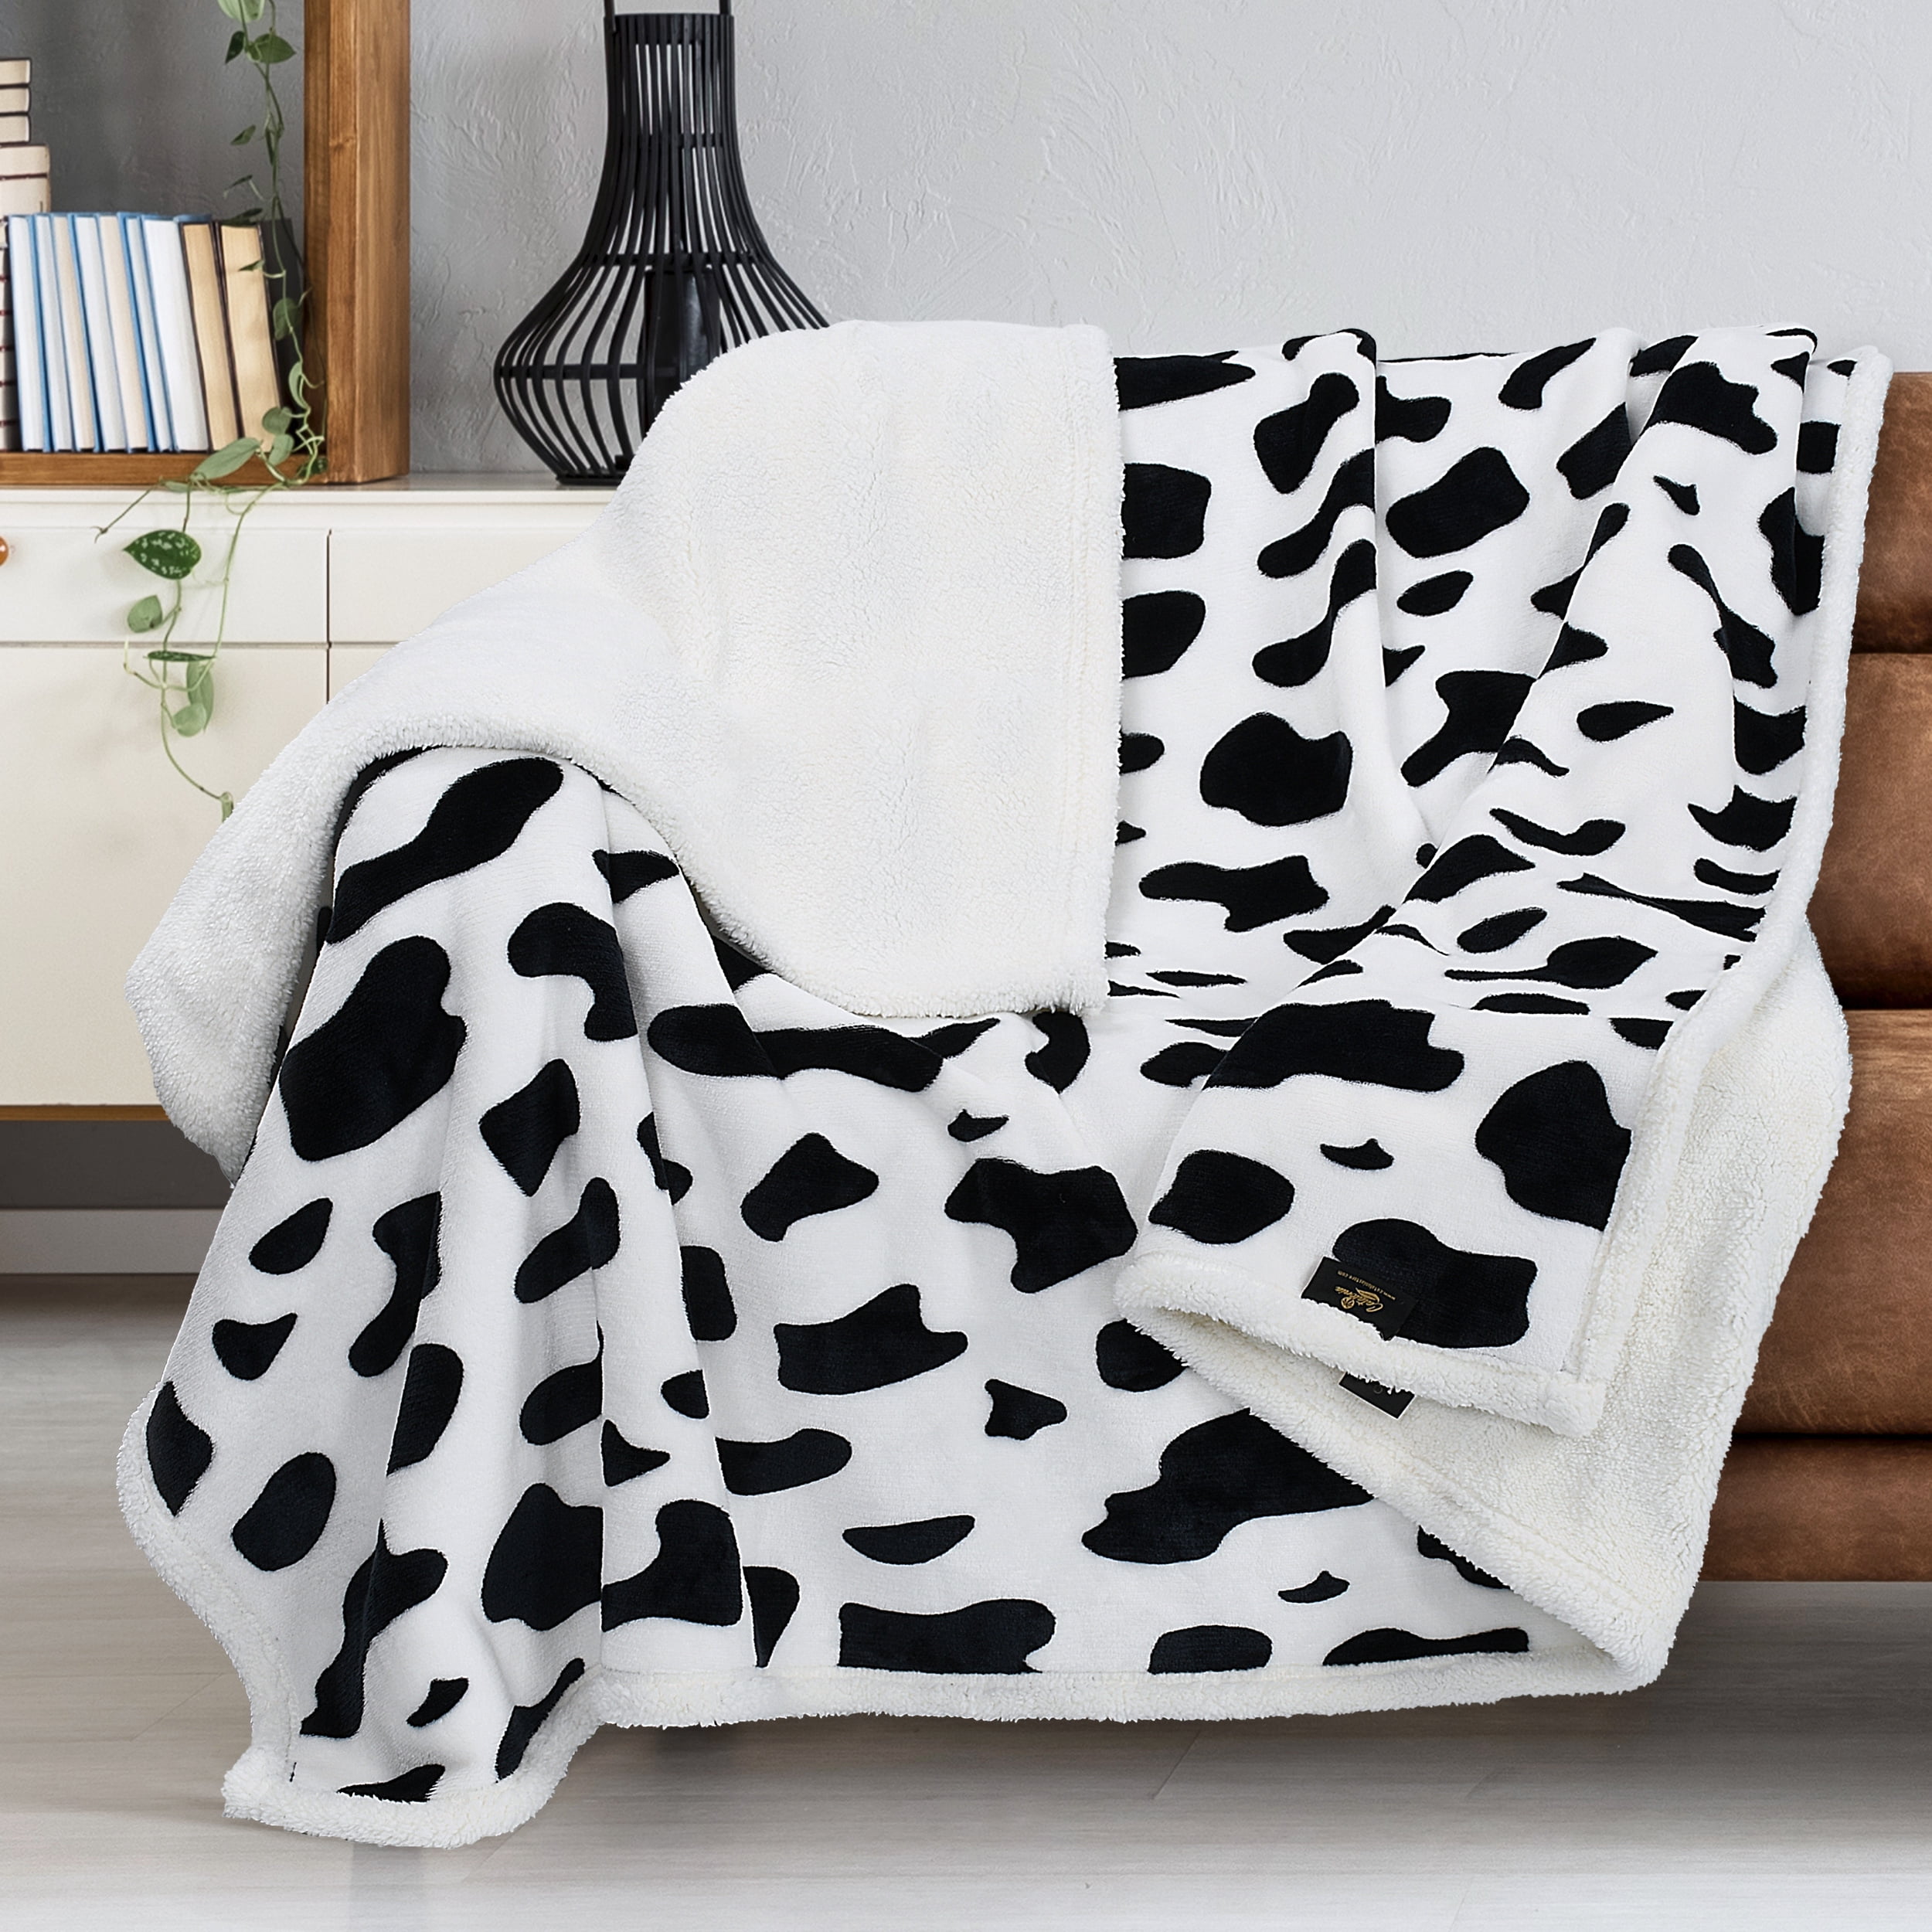 Throw Blanket Happy Cute Little Baby Cows Ultra-Soft Micro Fleece Blanket,for Bed Or Sofa,All Season Throw Blankets 60x50 